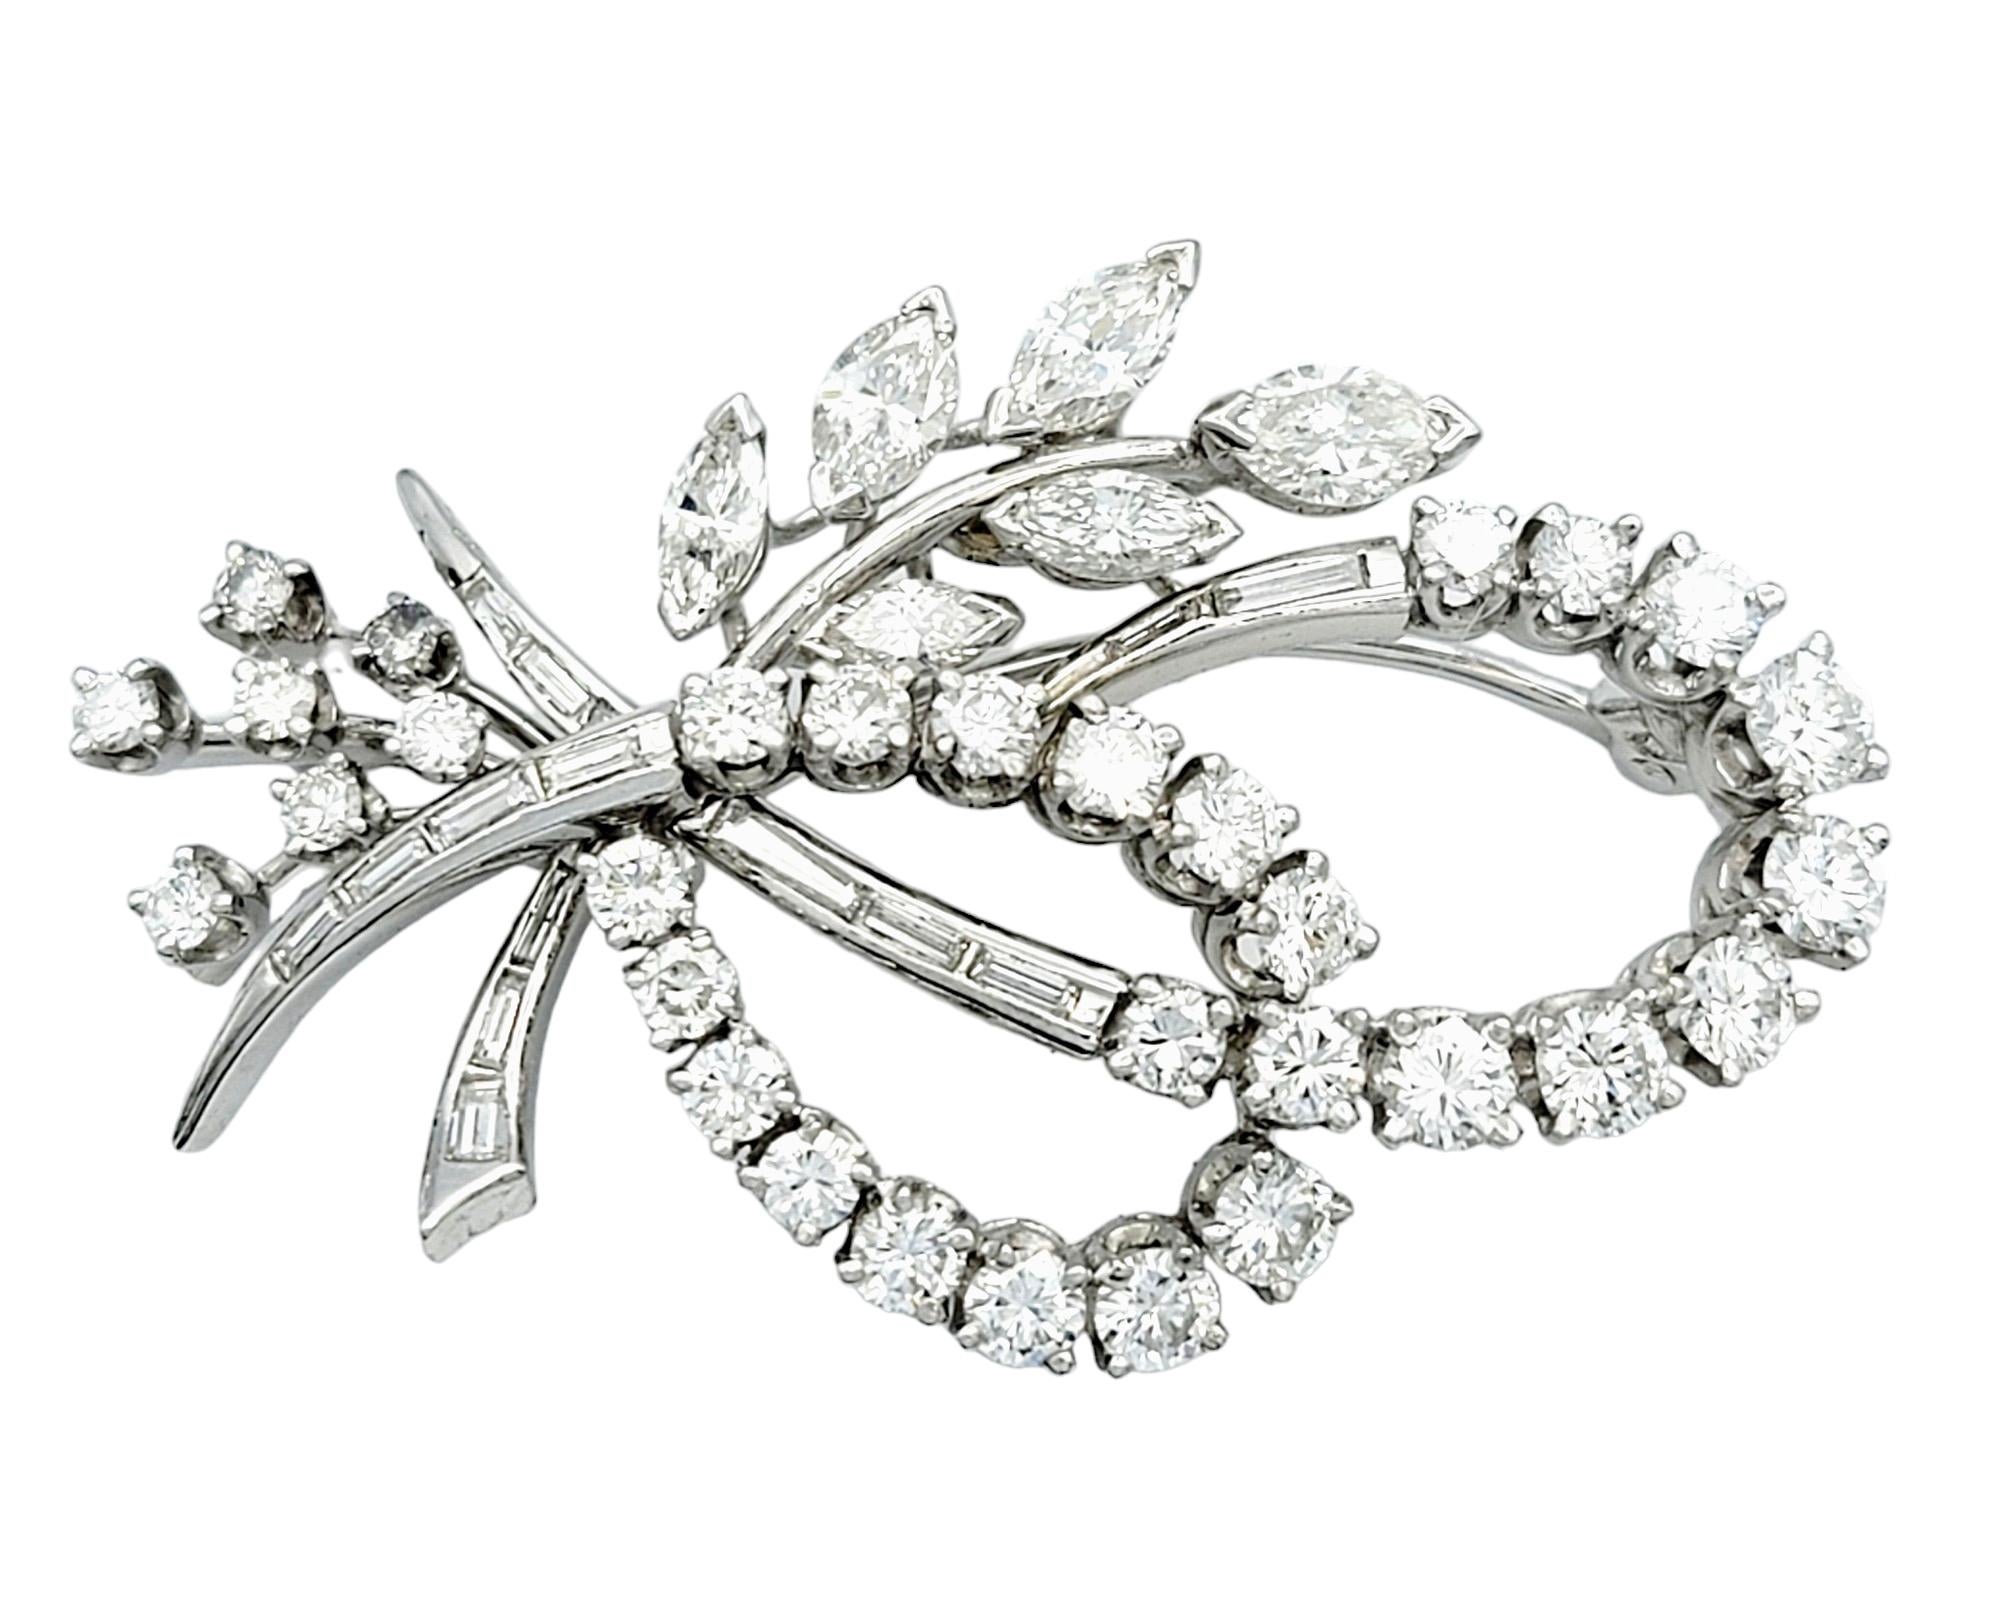 This enchanting and versatile diamond piece set in exquisite platinum is a work of art. Crafted in a captivating branch and leaf design, the piece features a harmonious blend of marquise, baguette, and round diamonds. The intricate arrangement of